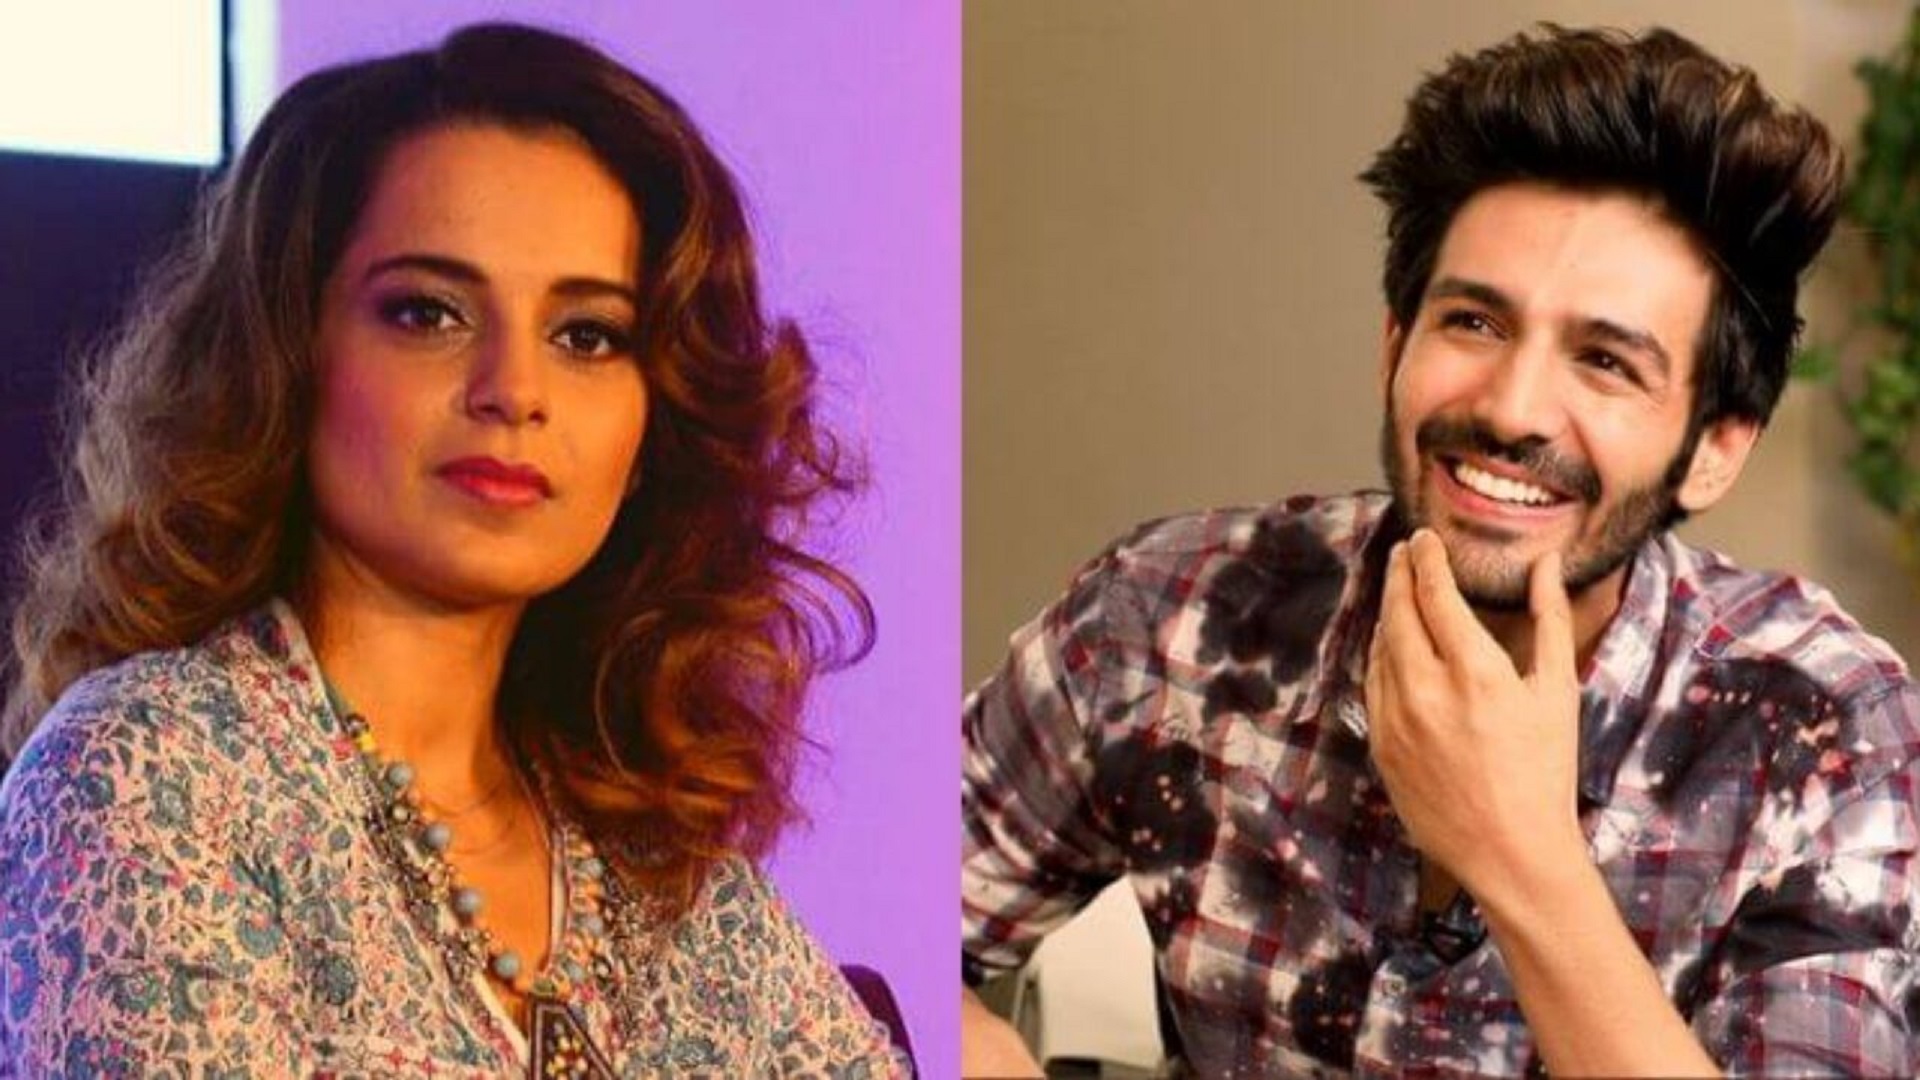 Kartik Aryan Reacts To Kangana Calling Him ‘Self-Made’ Star, ‘Huge compliment from someone like her’